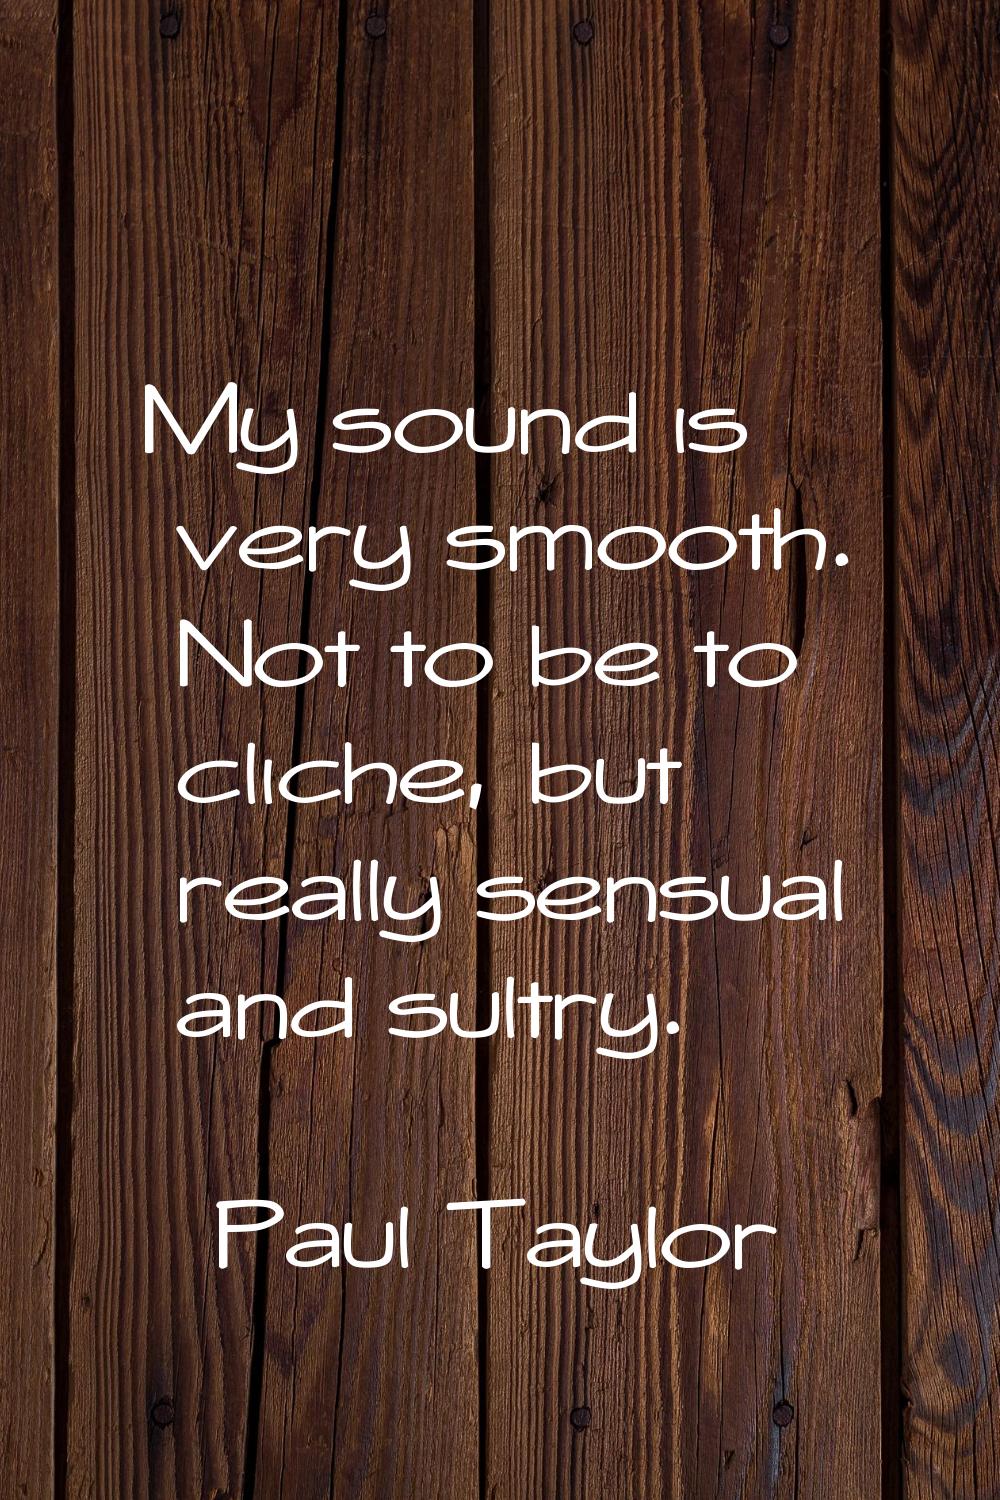 My sound is very smooth. Not to be to cliche, but really sensual and sultry.